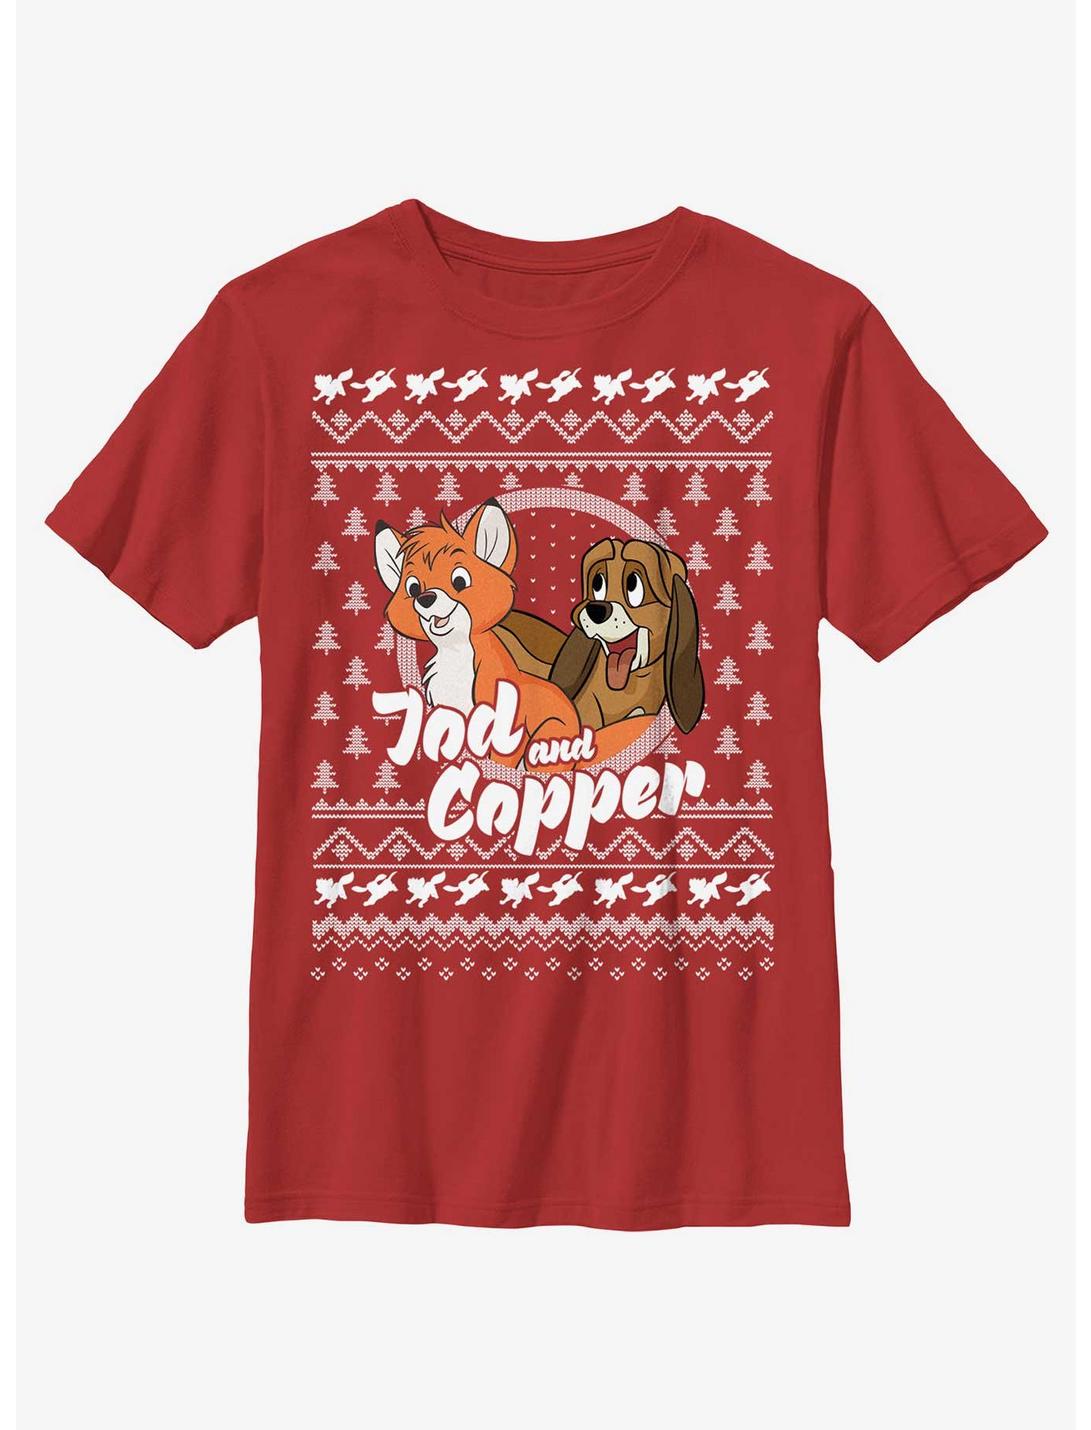 Disney The Fox and the Hound Tod and Copper Ugly Christmas Youth T-Shirt, RED, hi-res